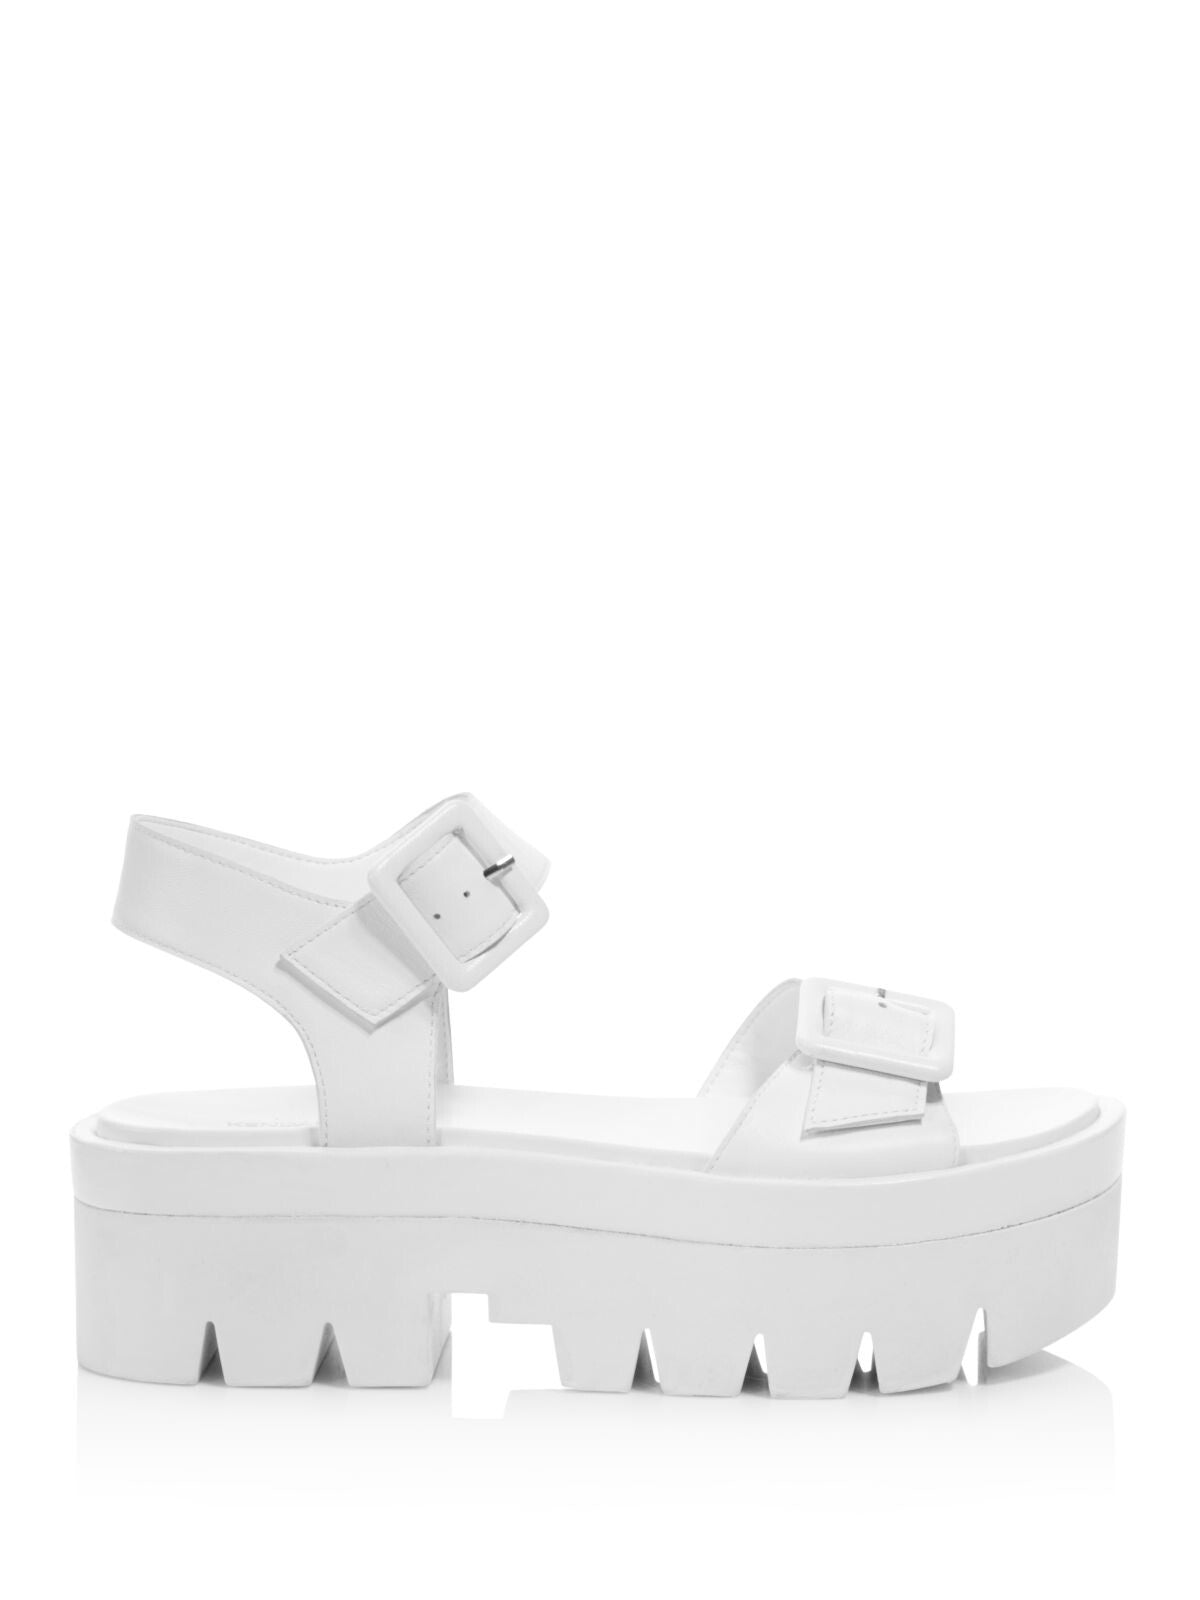 KENDALL + KYLIE Womens White Treaded Sole Ankle Strap Buckle Accent Wave Round Toe Wedge Buckle Leather Sandals Shoes M